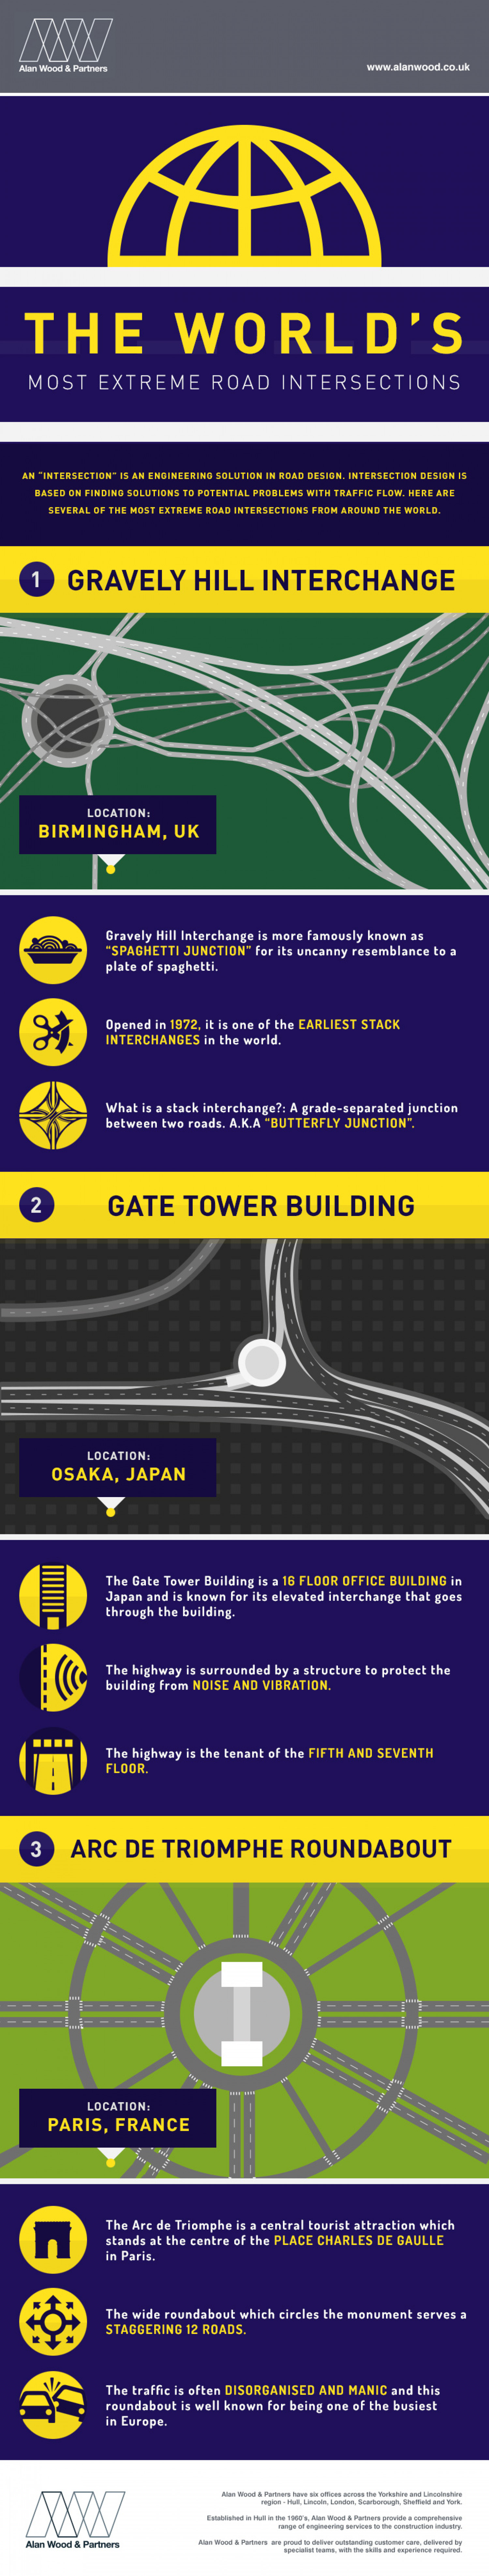 The World's Most Extreme Road Intersections Infographic